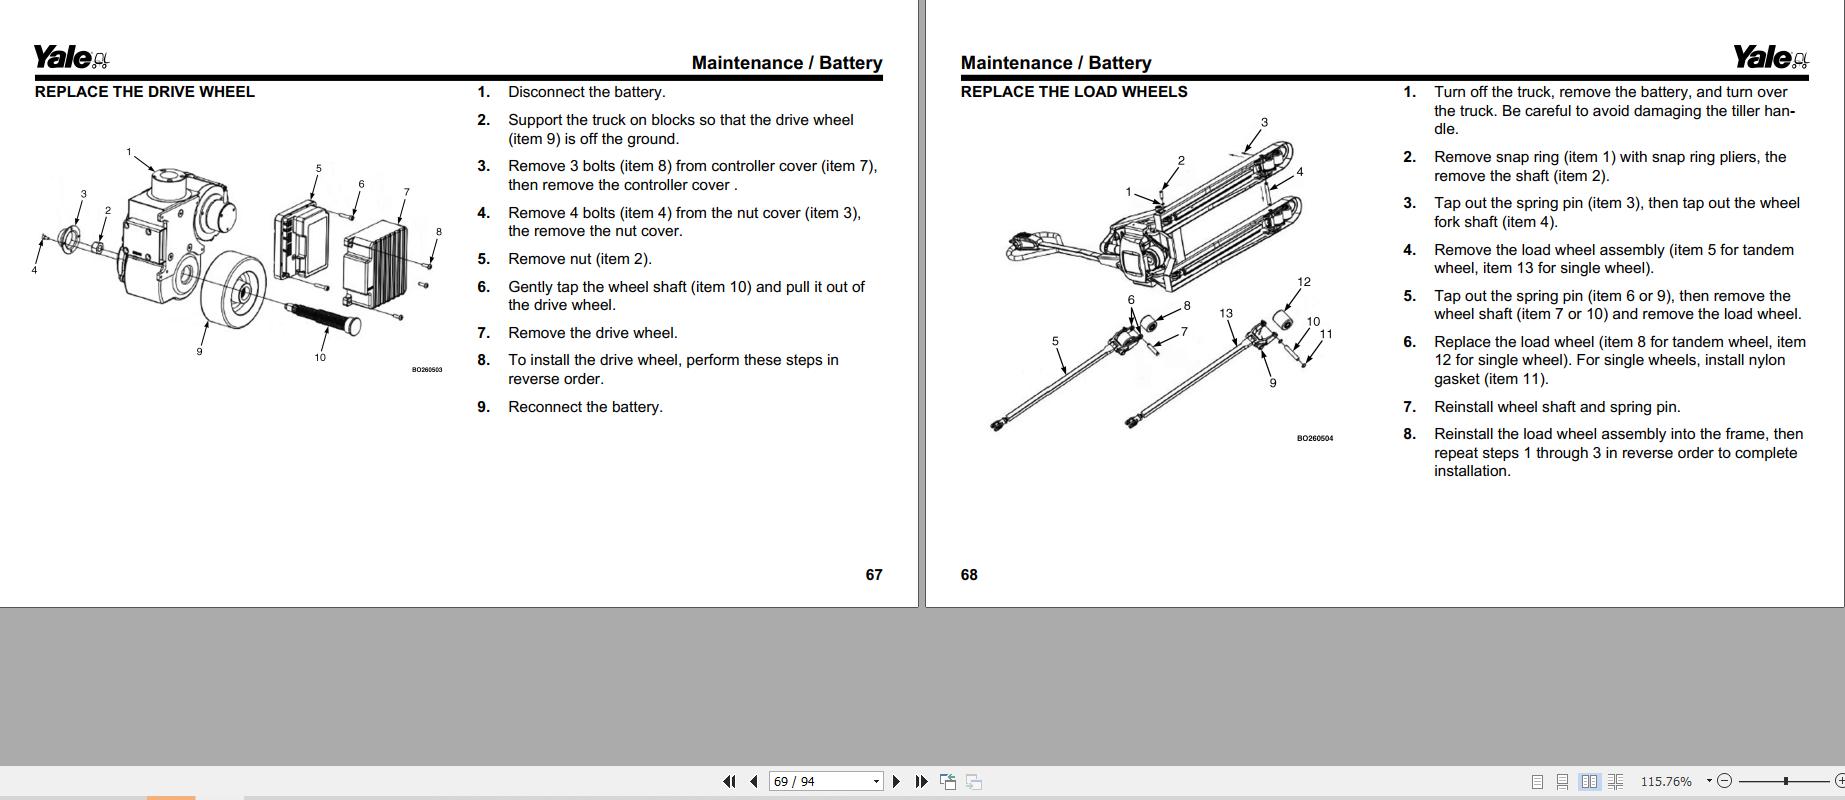 Yale Forklift A3D4 (MPC15) Operating Manual | Auto Repair Manual Forum ...